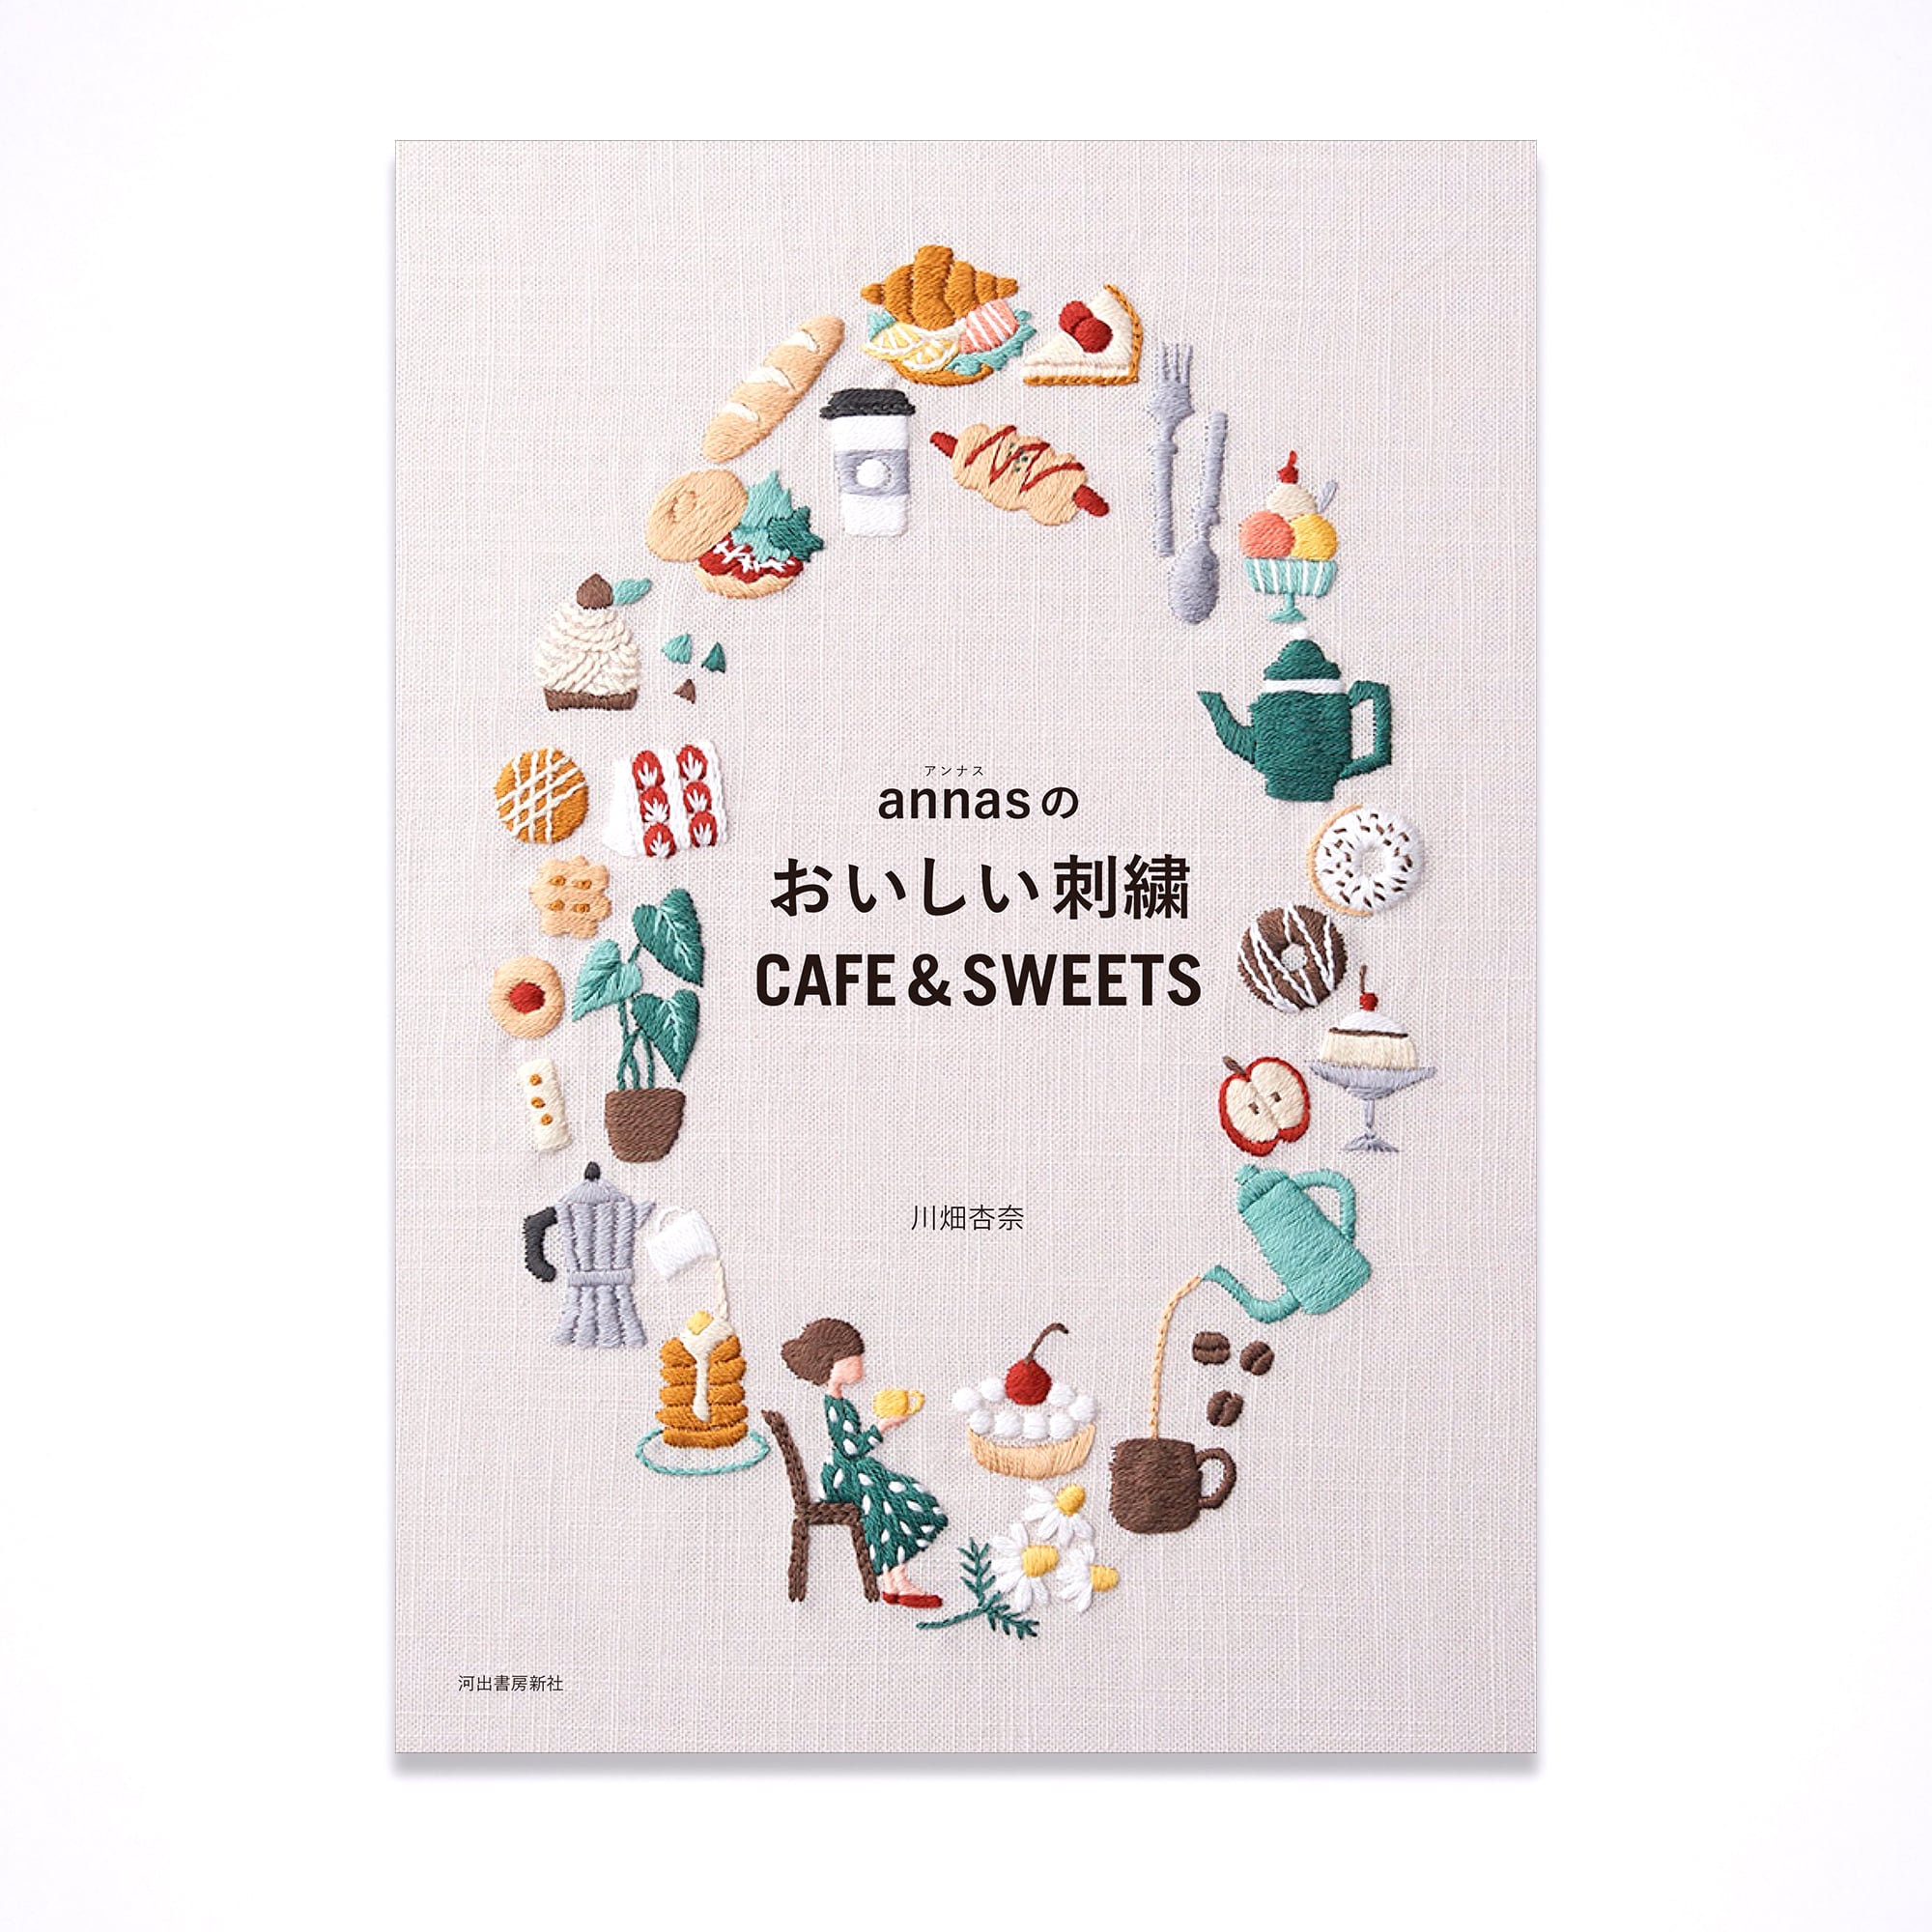 annasのおいしい刺繍 CAFE＆SWEETS【サイン付き】 | Net store アンナとラパン powered by BASE